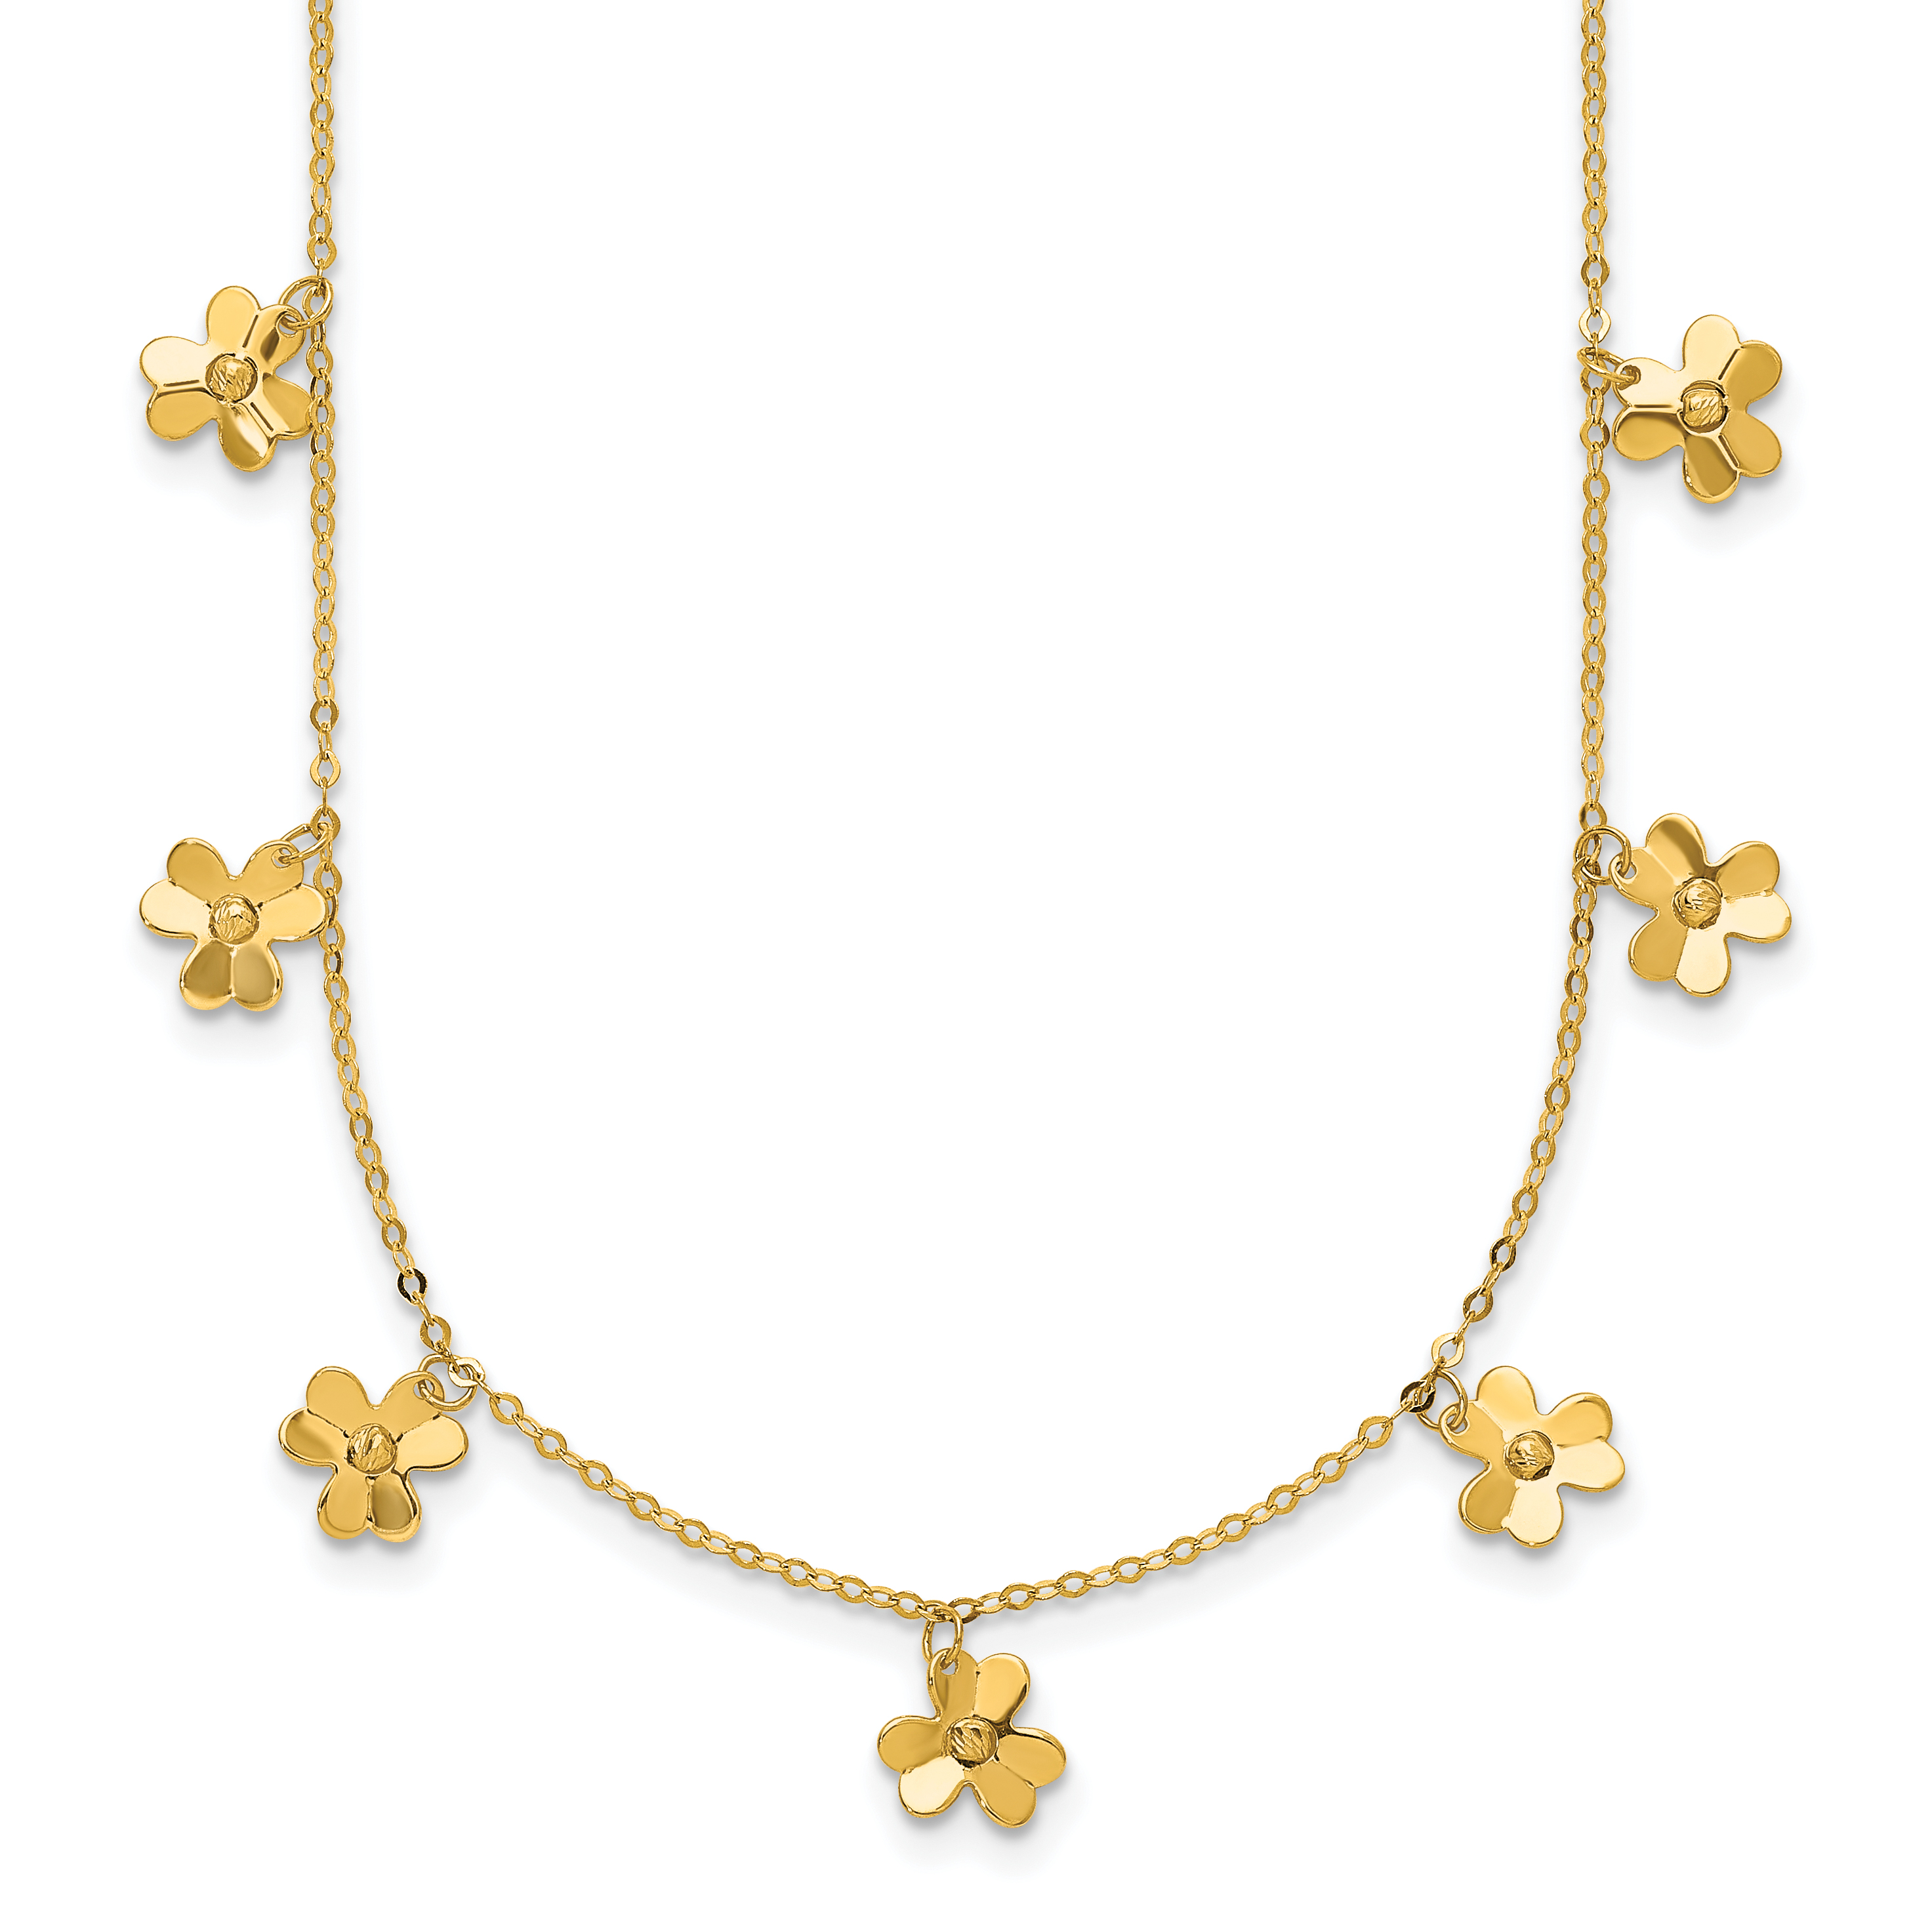 YELLOW GOLD PLATED 925 Sterling Silver Irish Shamrock 3-Leaf Clover Necklace  Box £13.89 - PicClick UK